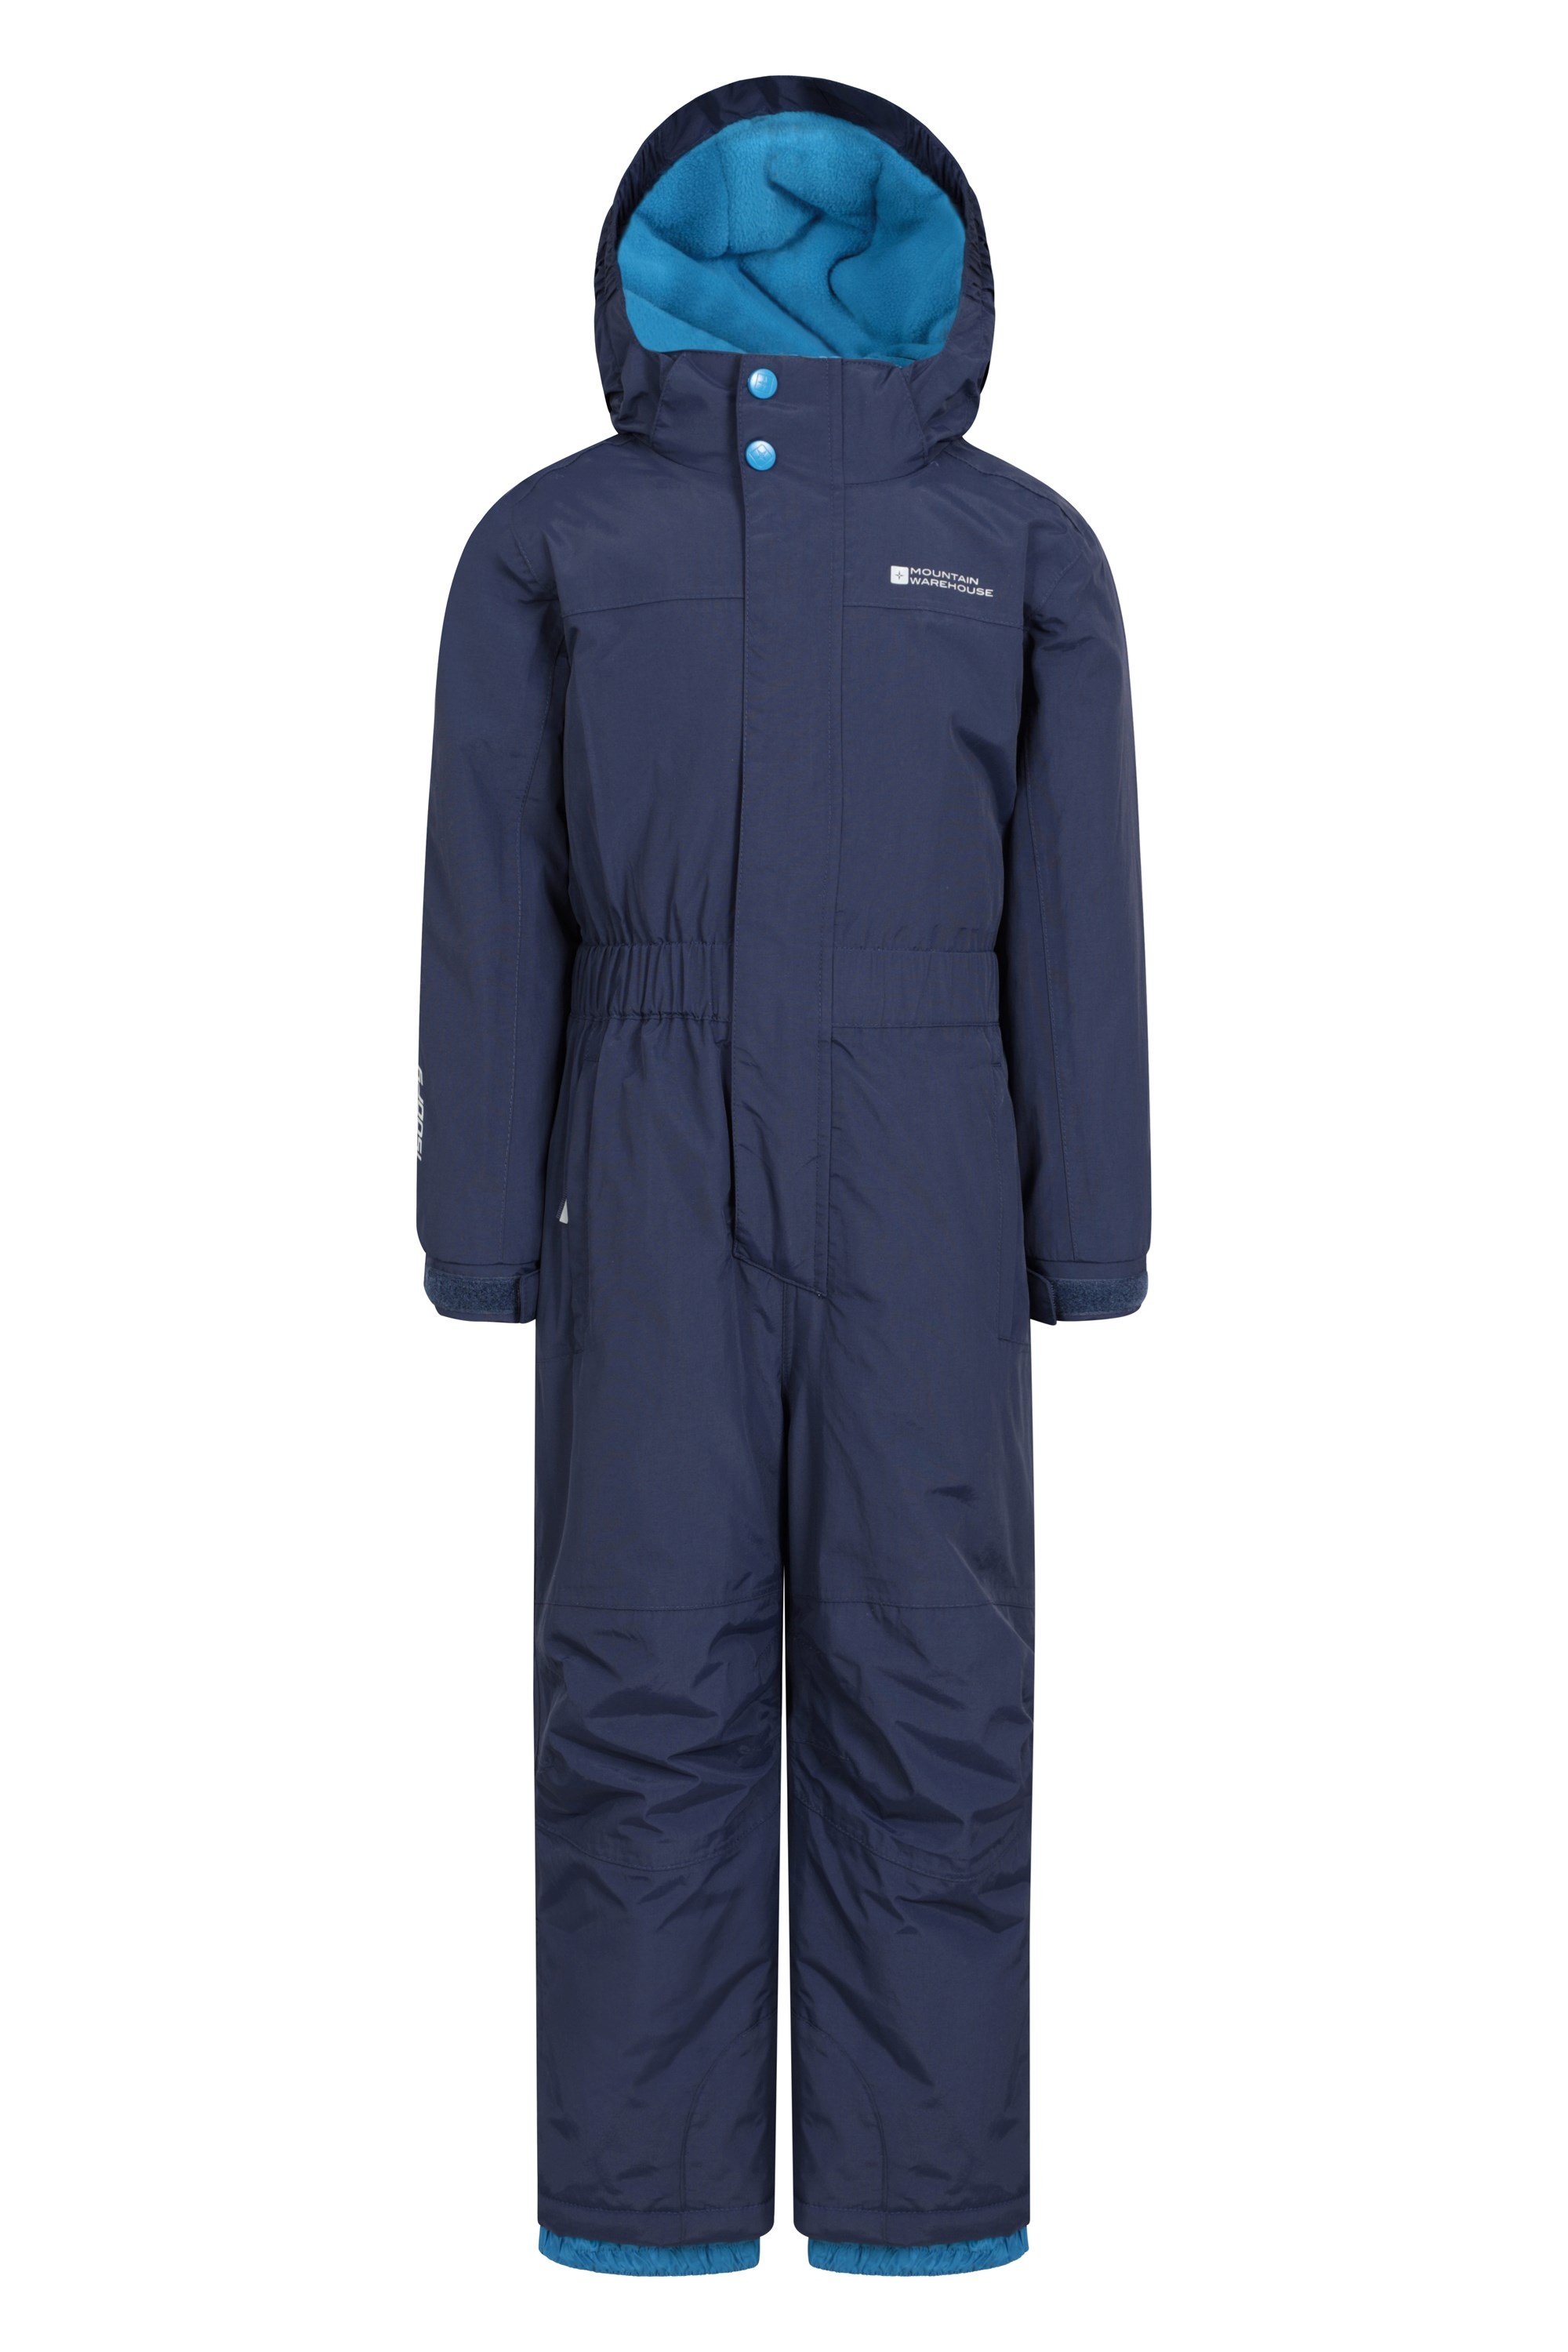 Mountain Warehouse Girls Snowsuits with Waterproof and Fleece Lined for Comfort 